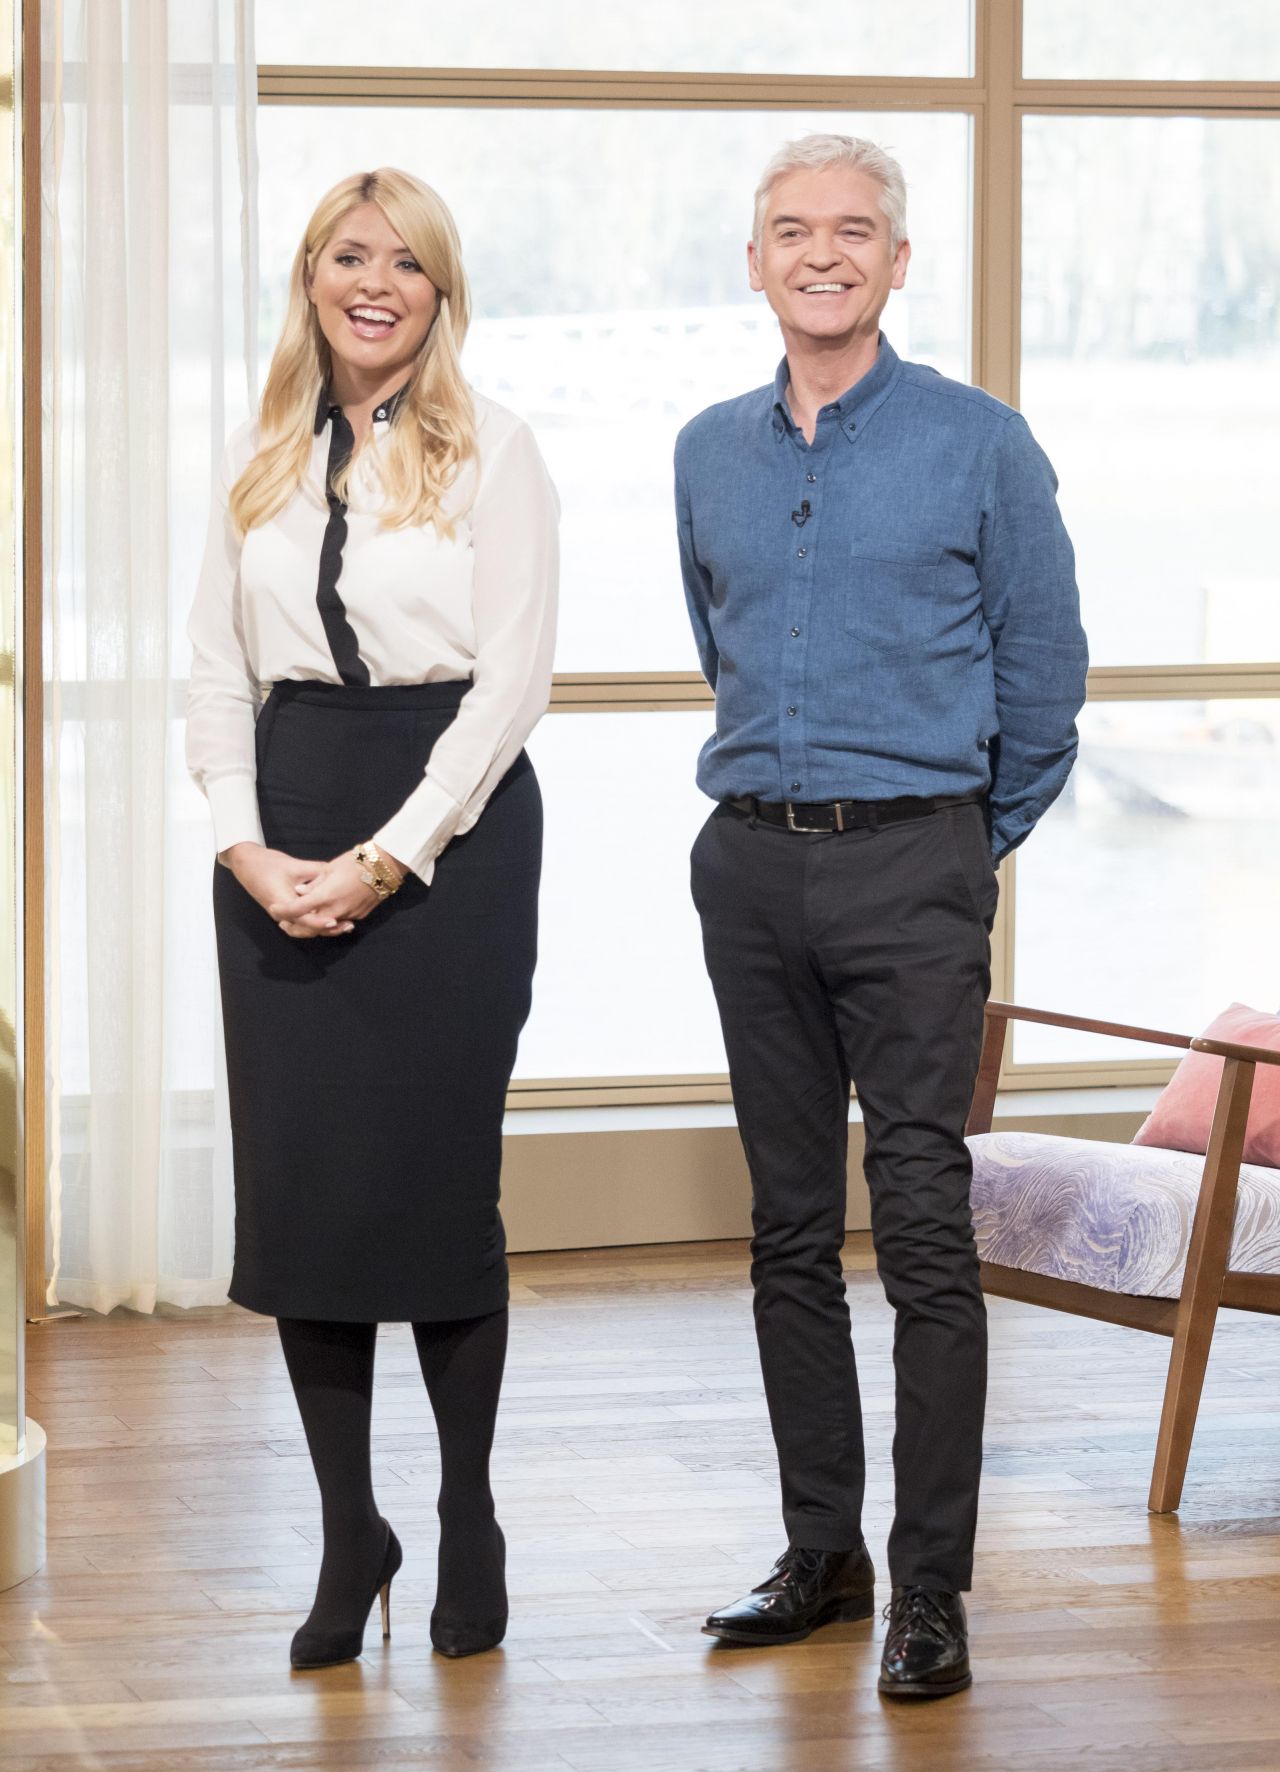 Holly Willoughby - 'This Morning' TV Show in London, January 20161280 x 1772